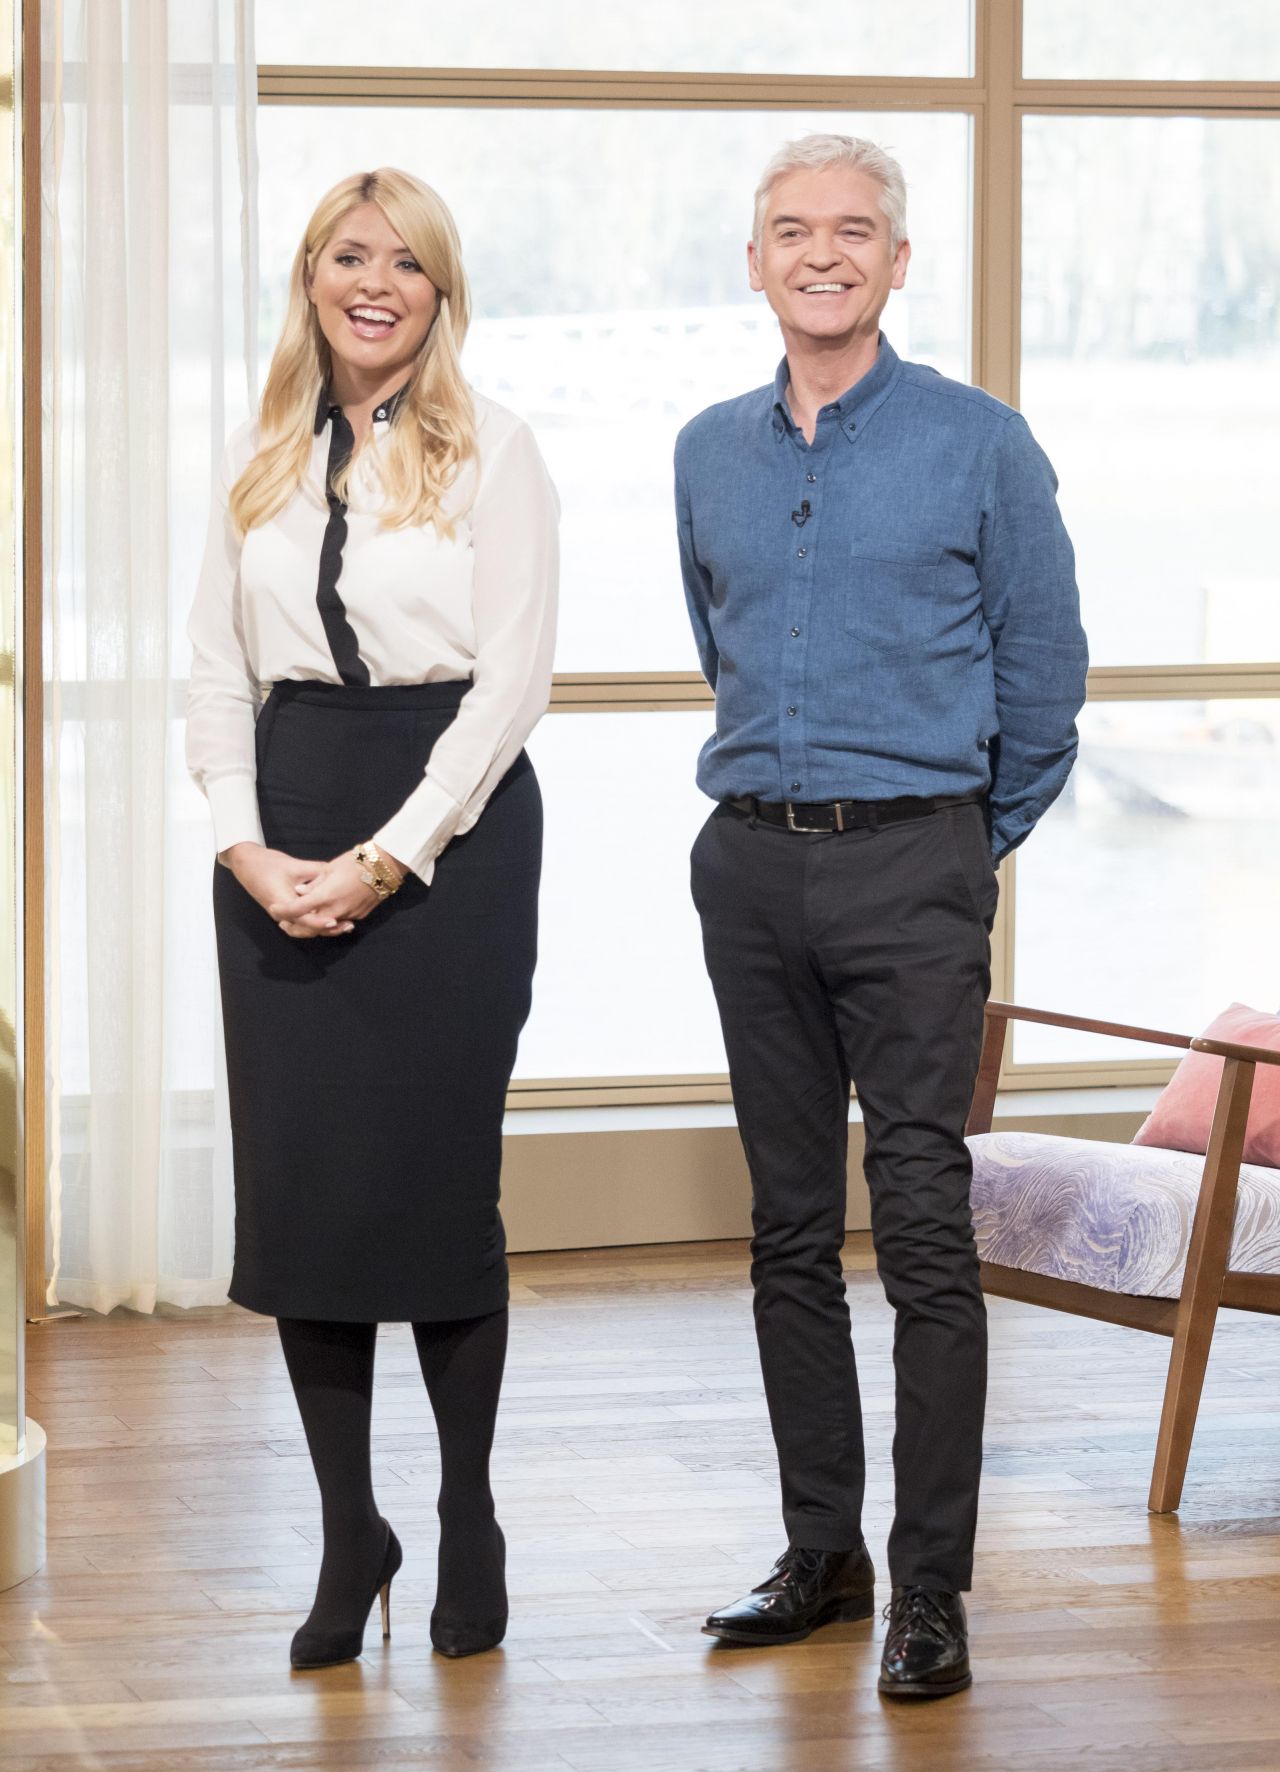 Holly Willoughby - 'This Morning' TV Show in London, January 20161280 x 1772